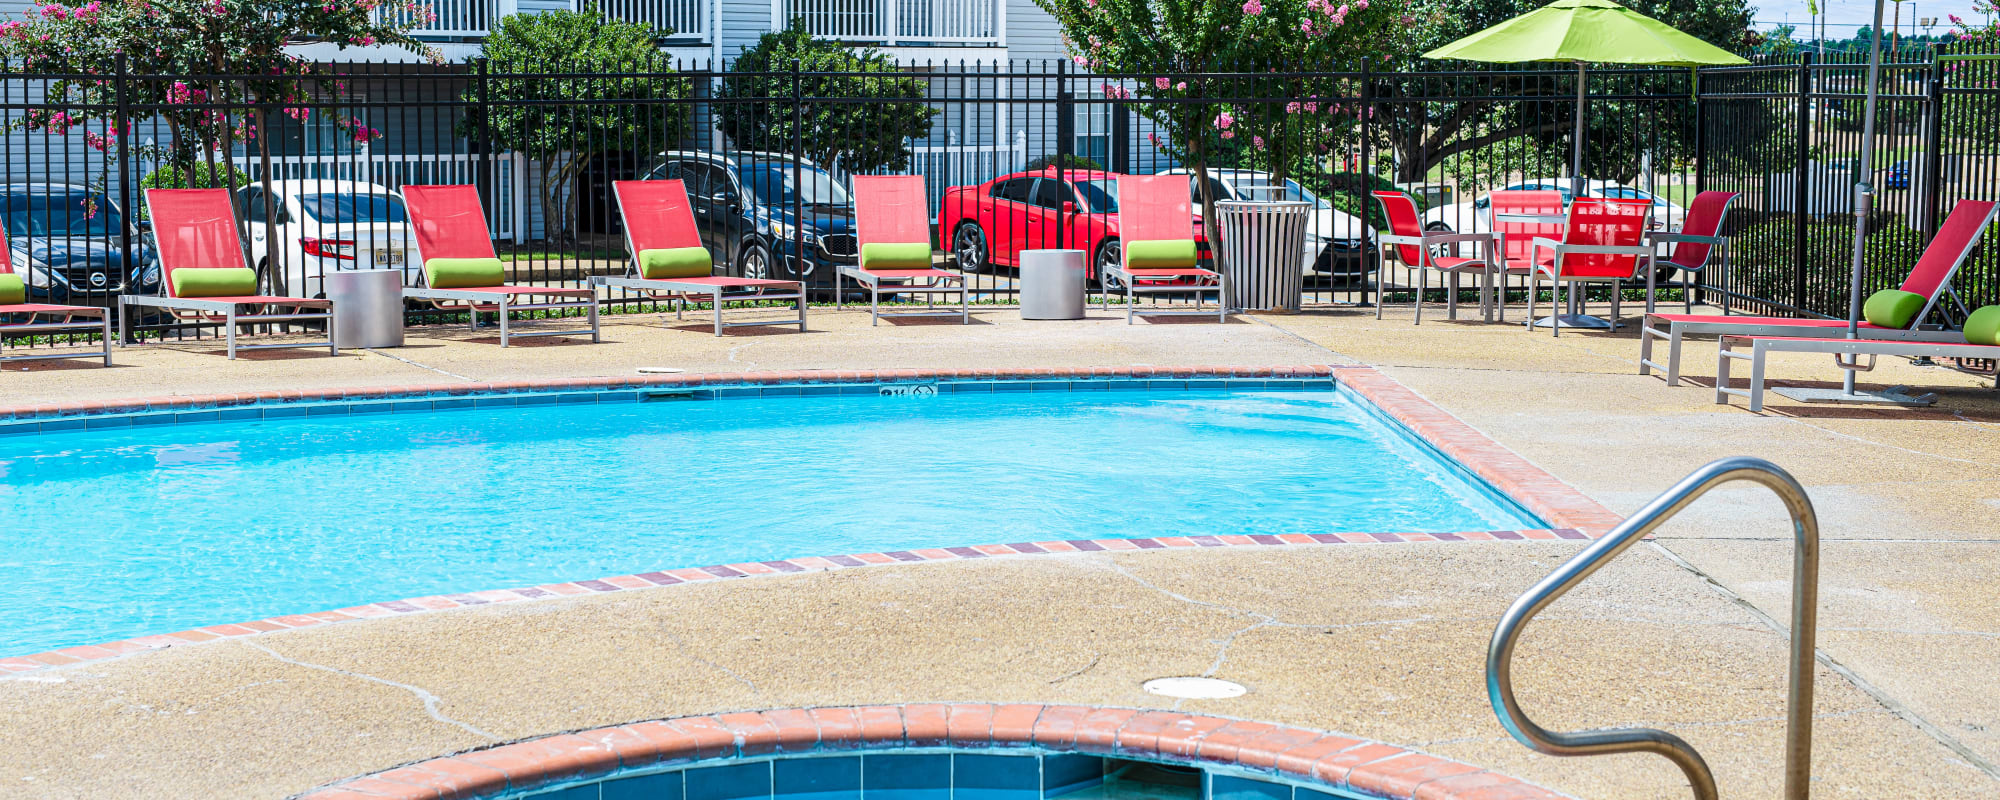 Take a dip in our swimming pool at Bradford Place Apartments in Byram, Mississippi